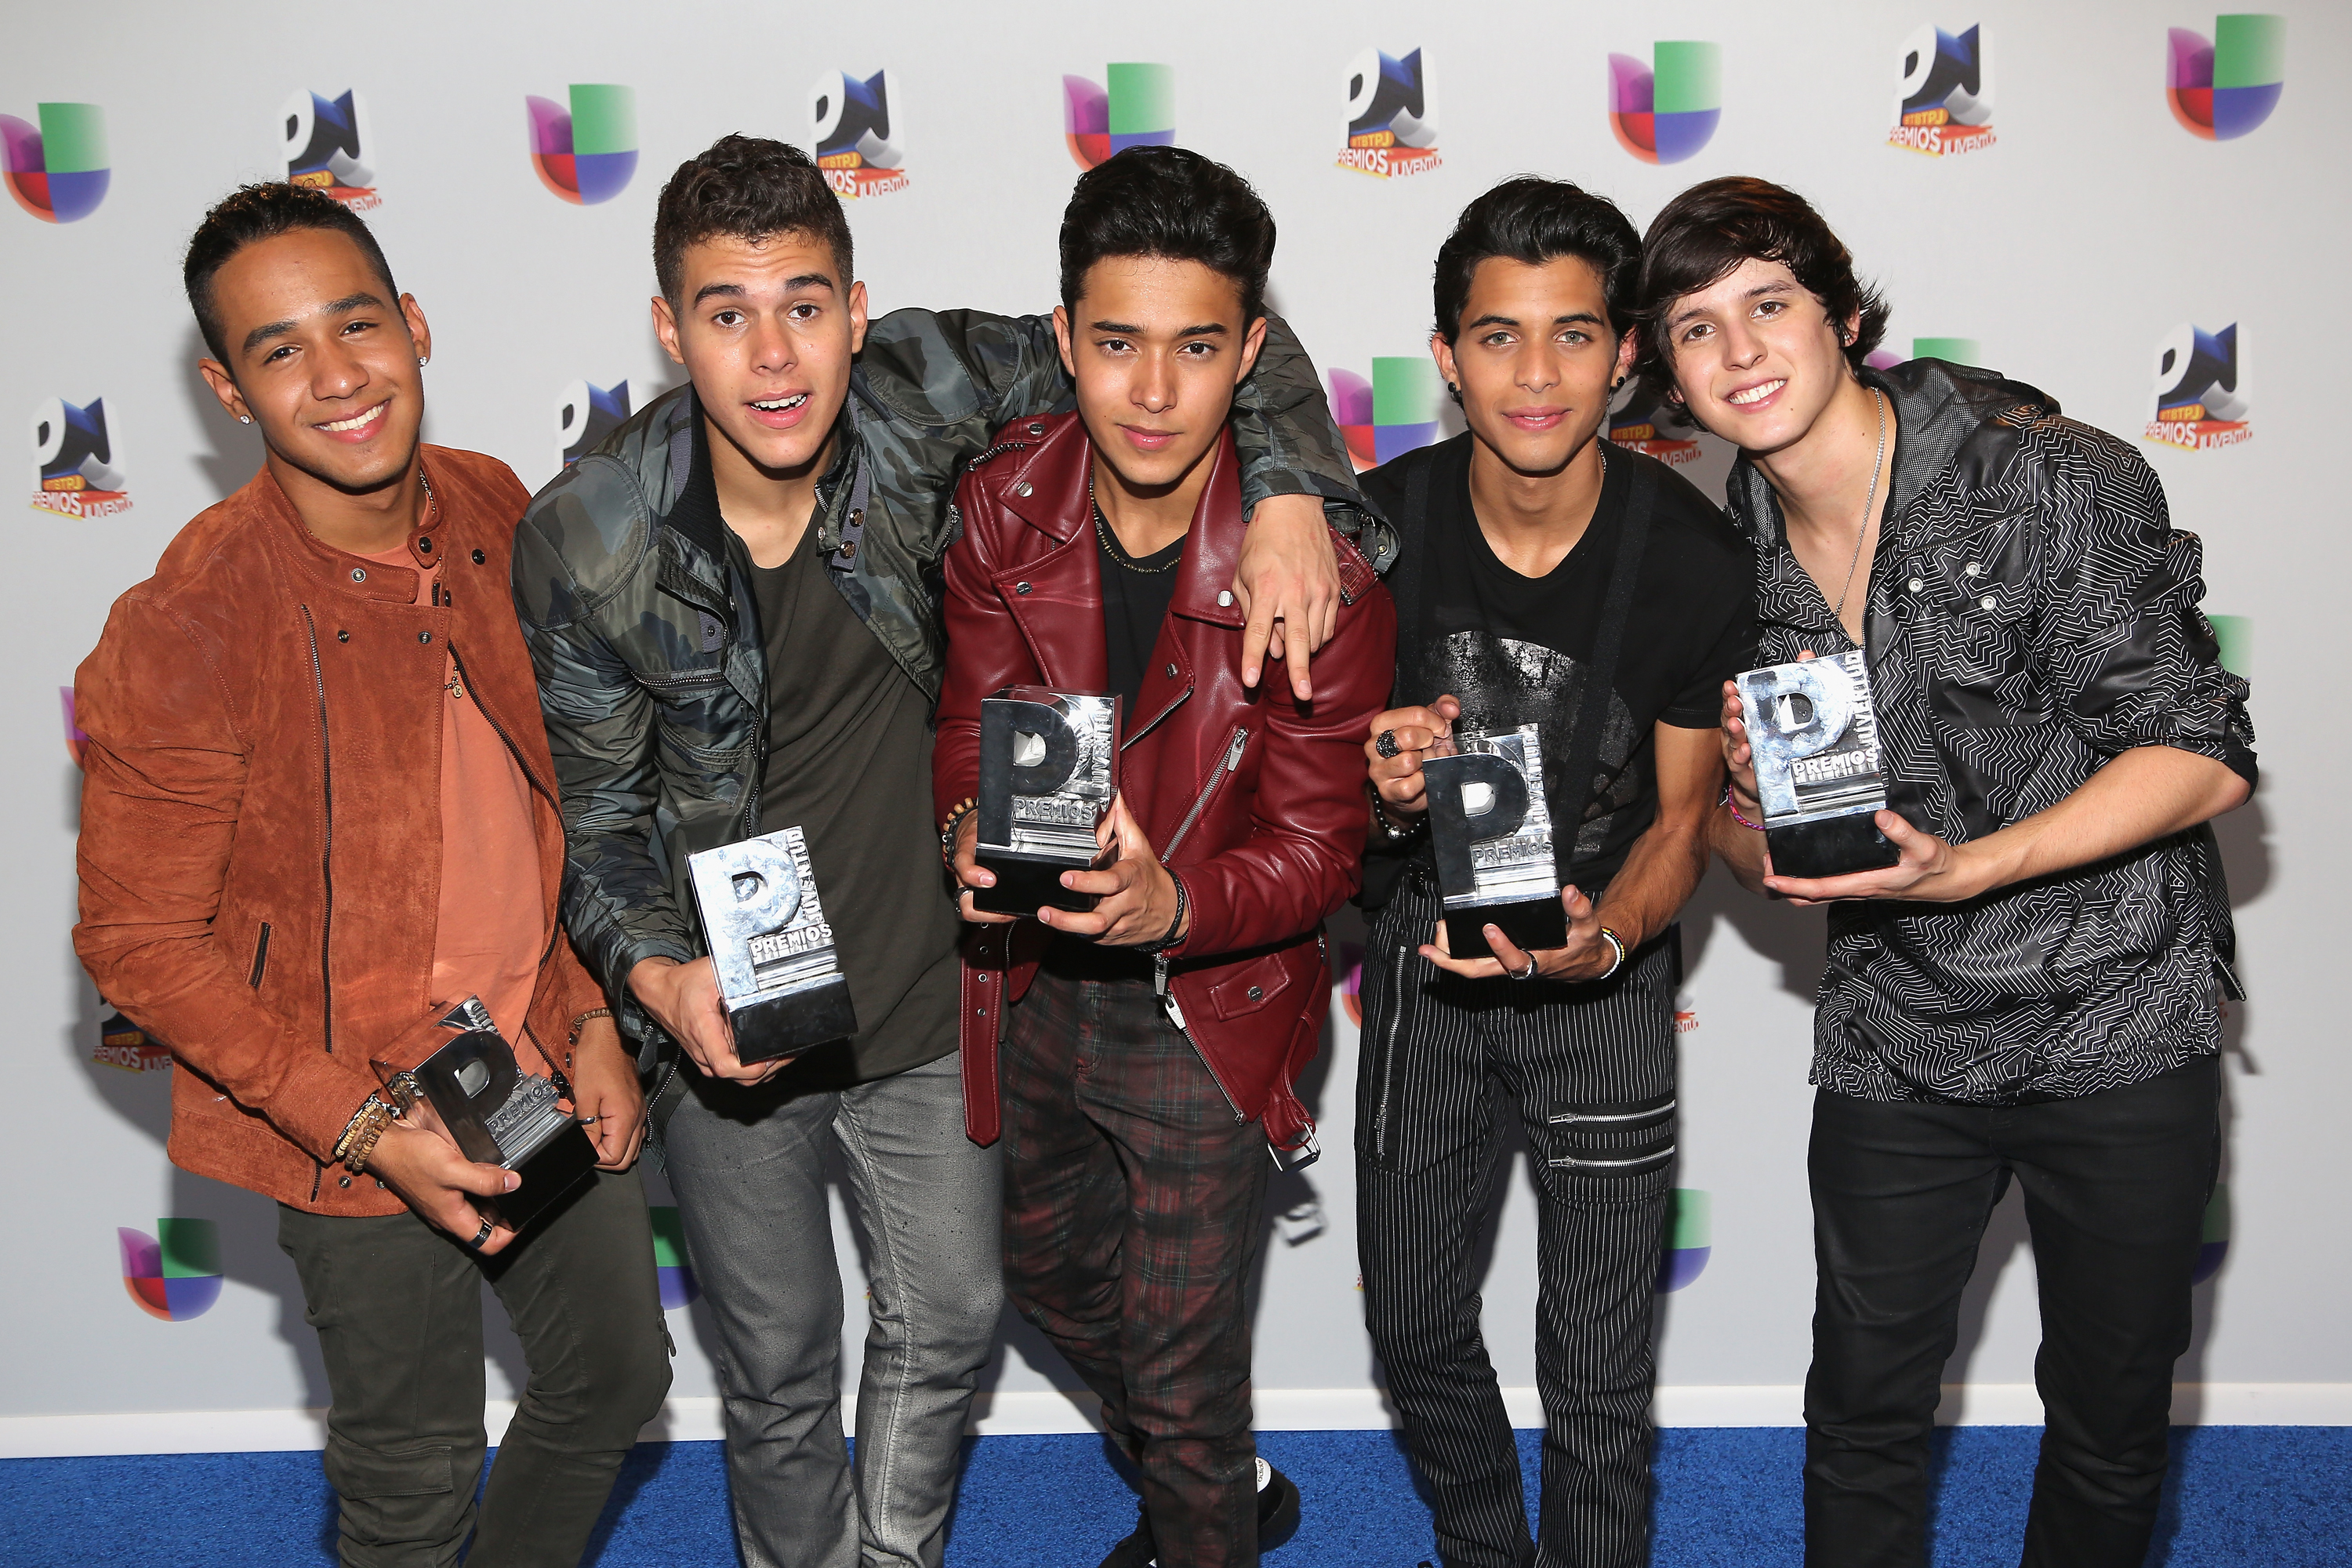 MIAMI, FL - JULY 14: Singers Zabdiel de Jesus, Richard Camacho, Erick Brian Colon, Joel Pimentel and Christopher Velez of CNCO pose with awards at the Univision's 13th Edition Of Premios Juventud Youth Awards at Bank United Center on July 14, 2016 in Miami, Florida.   Alexander Tamargo/Getty Images/AFP